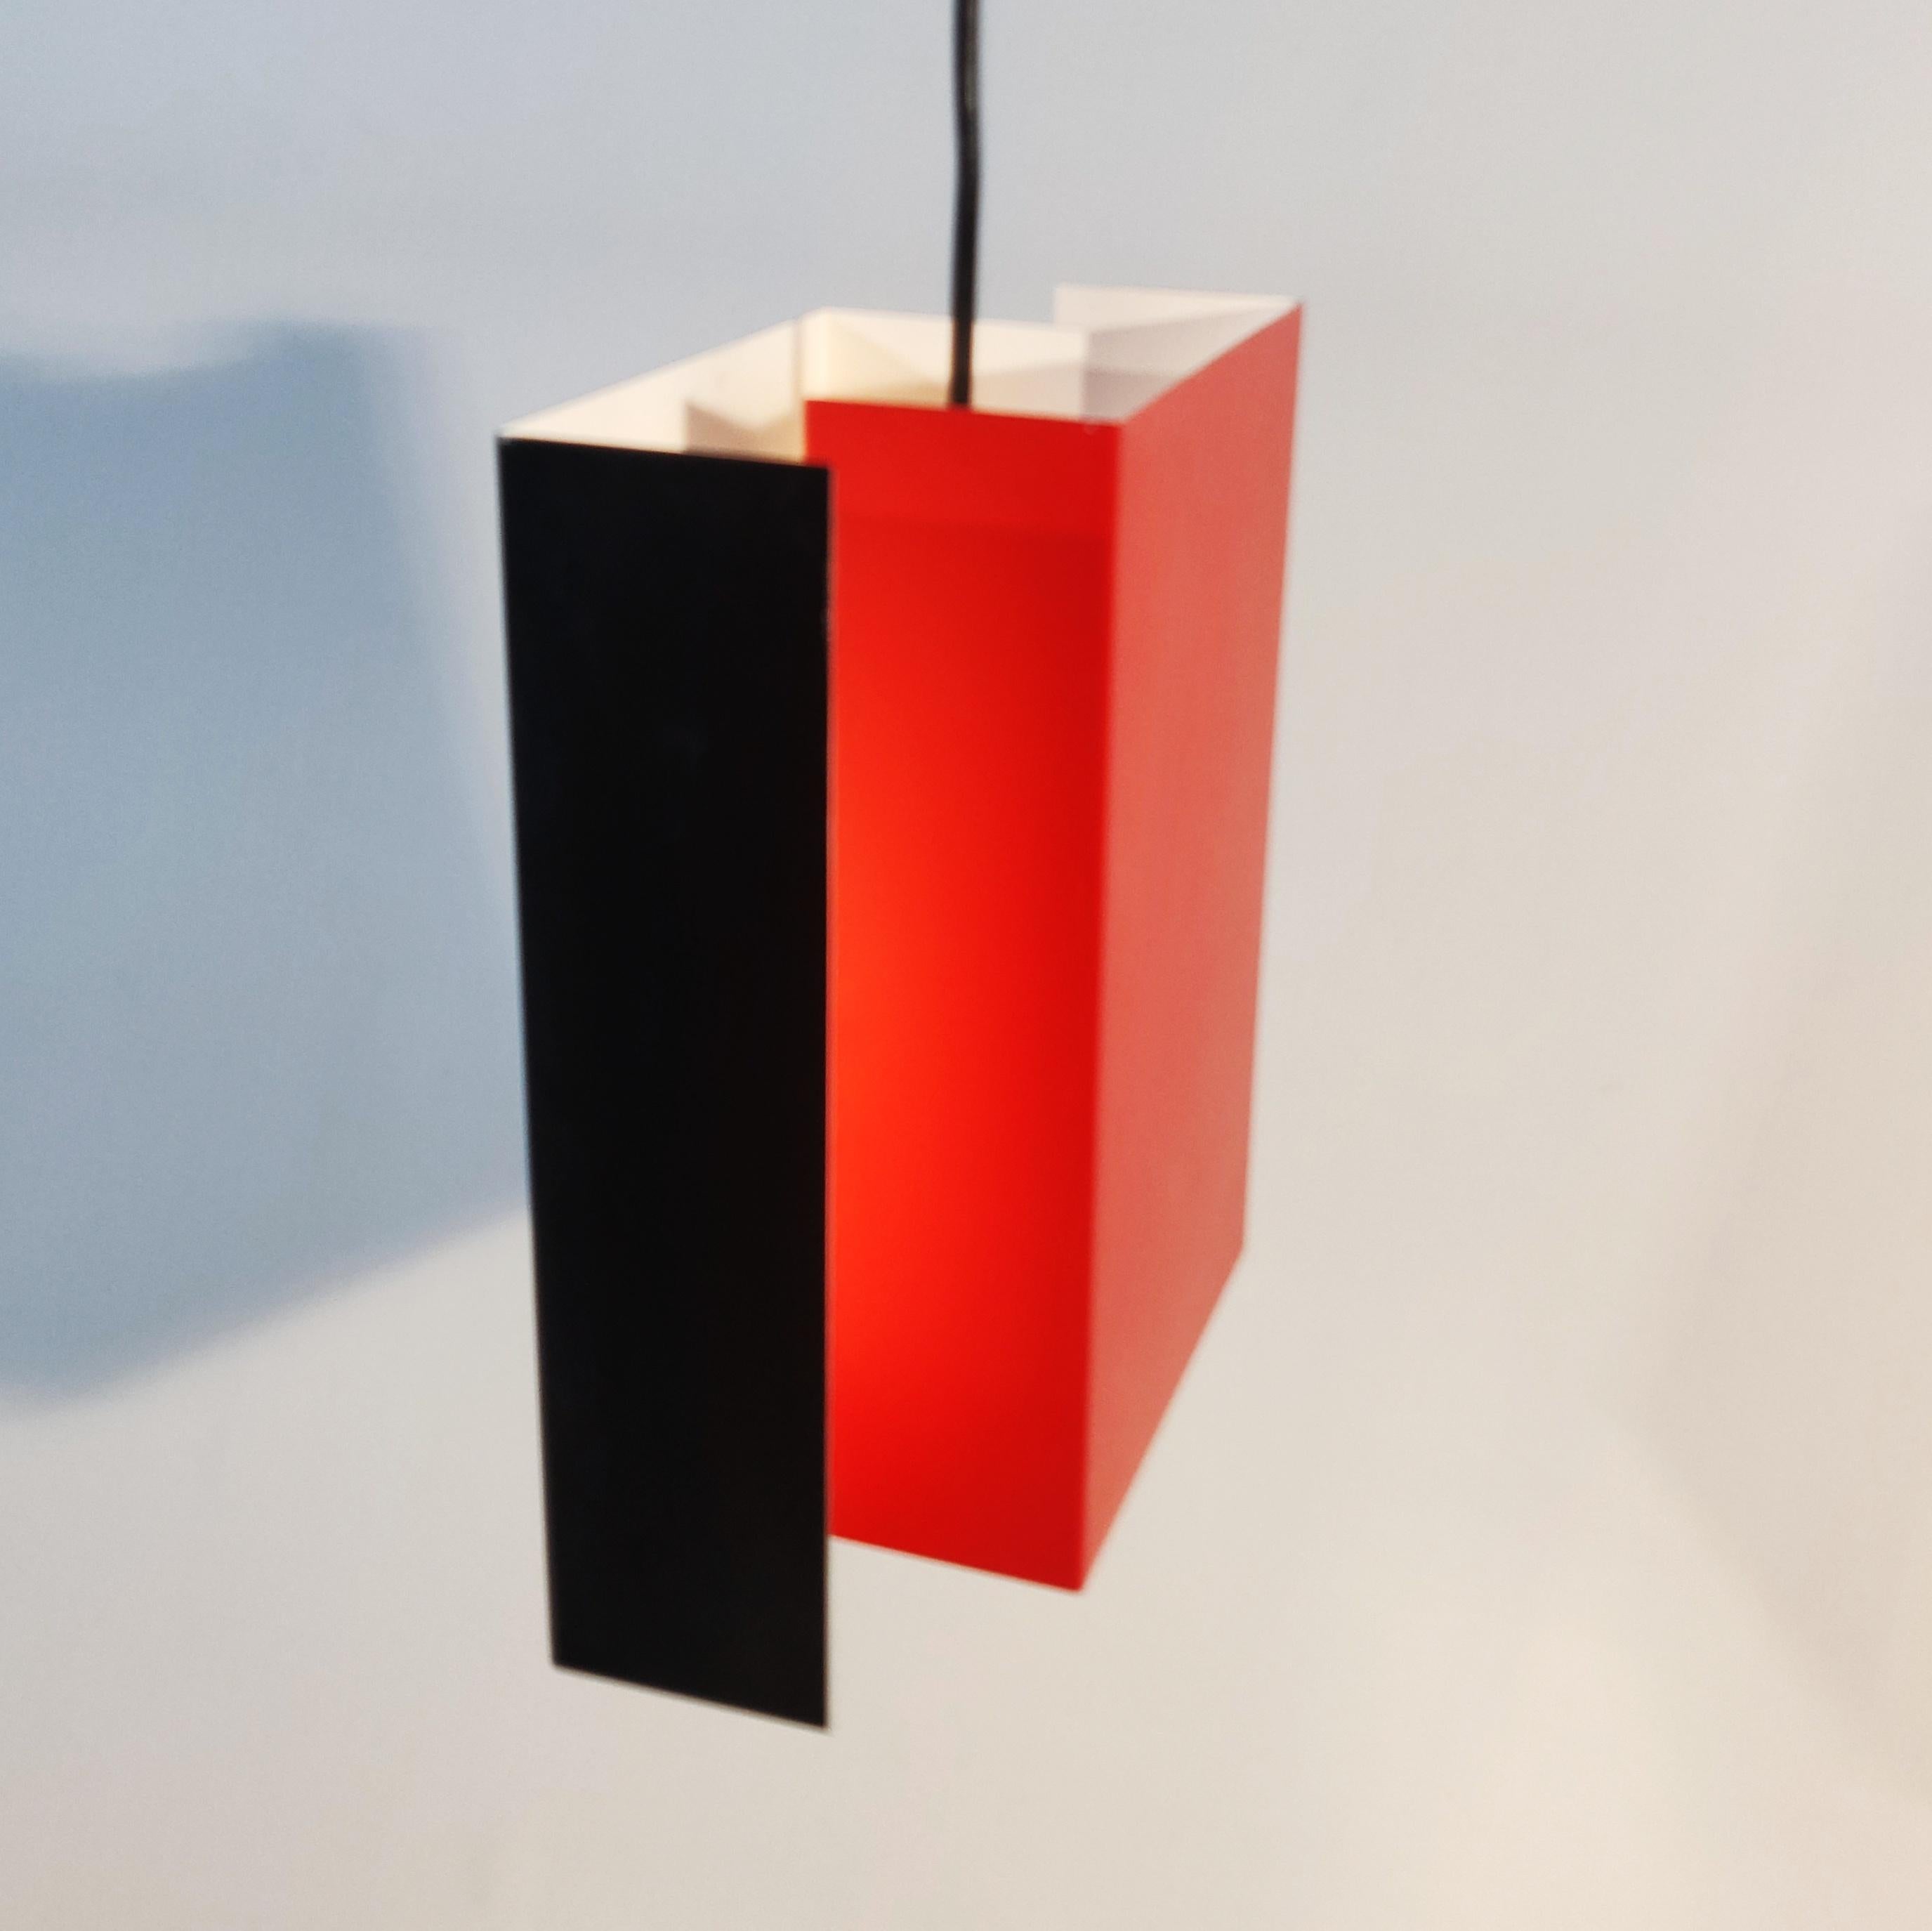 Rare pendant / table lamp by Simon Poul Henningsen for LYFA, Denmark, 1970s.
Nippon, rising sun, is the name of this zen-like lamp which be used as a pendant or as a table lamp. Danish architect and lighting designer Simon Poul Henningsen , son of